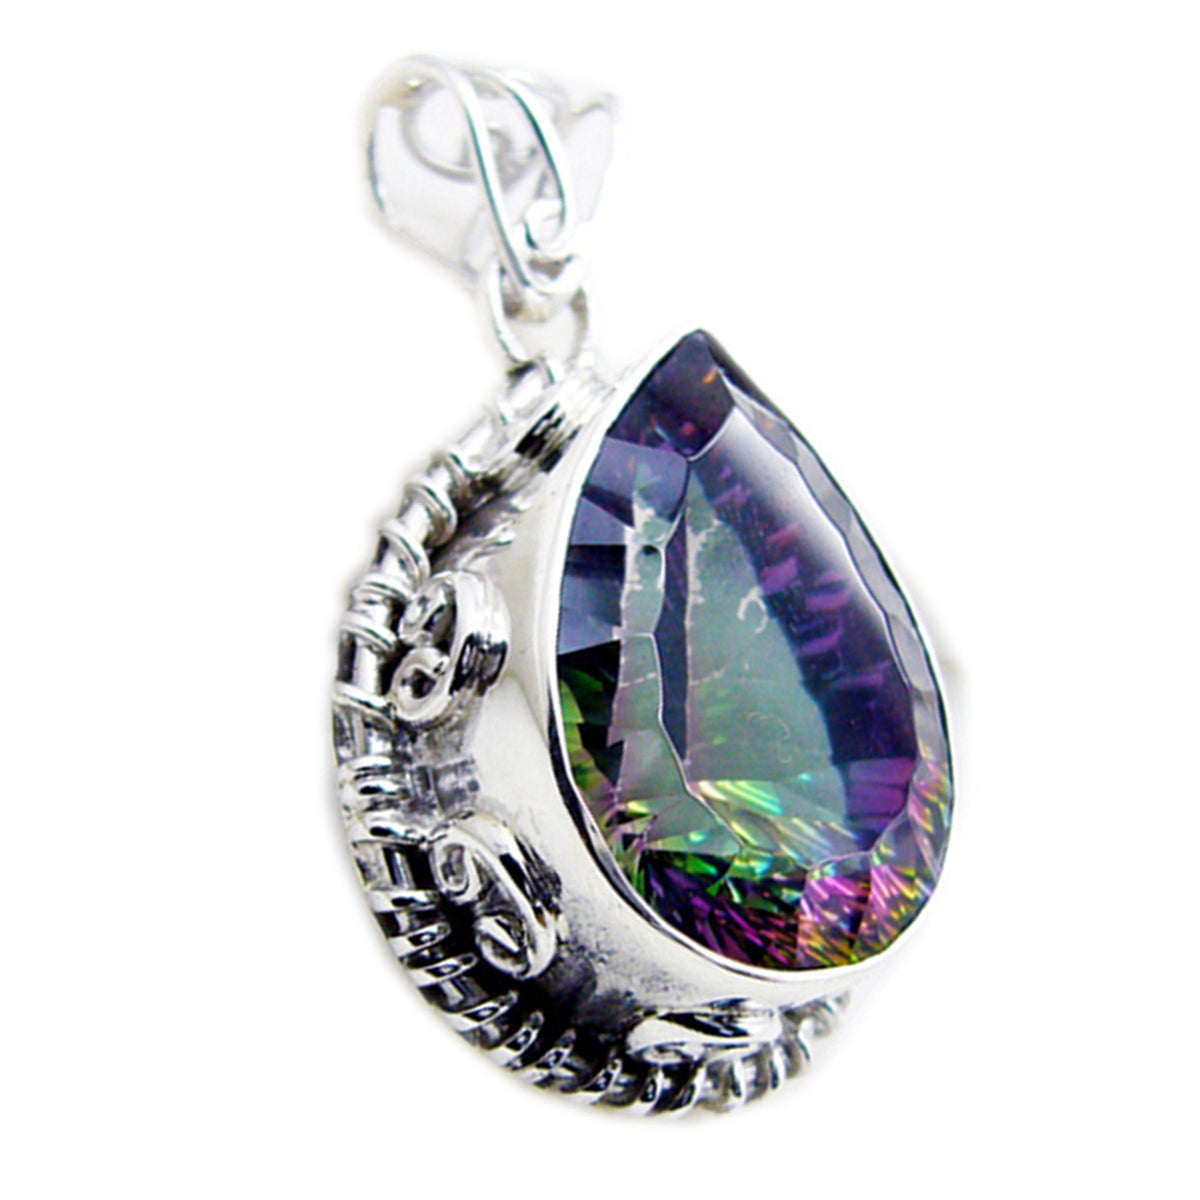 Riyo Fit Gemstone Pear Faceted Multi Color Mystic Quartz 1181 Sterling Silver Pendant Gift For Birthday